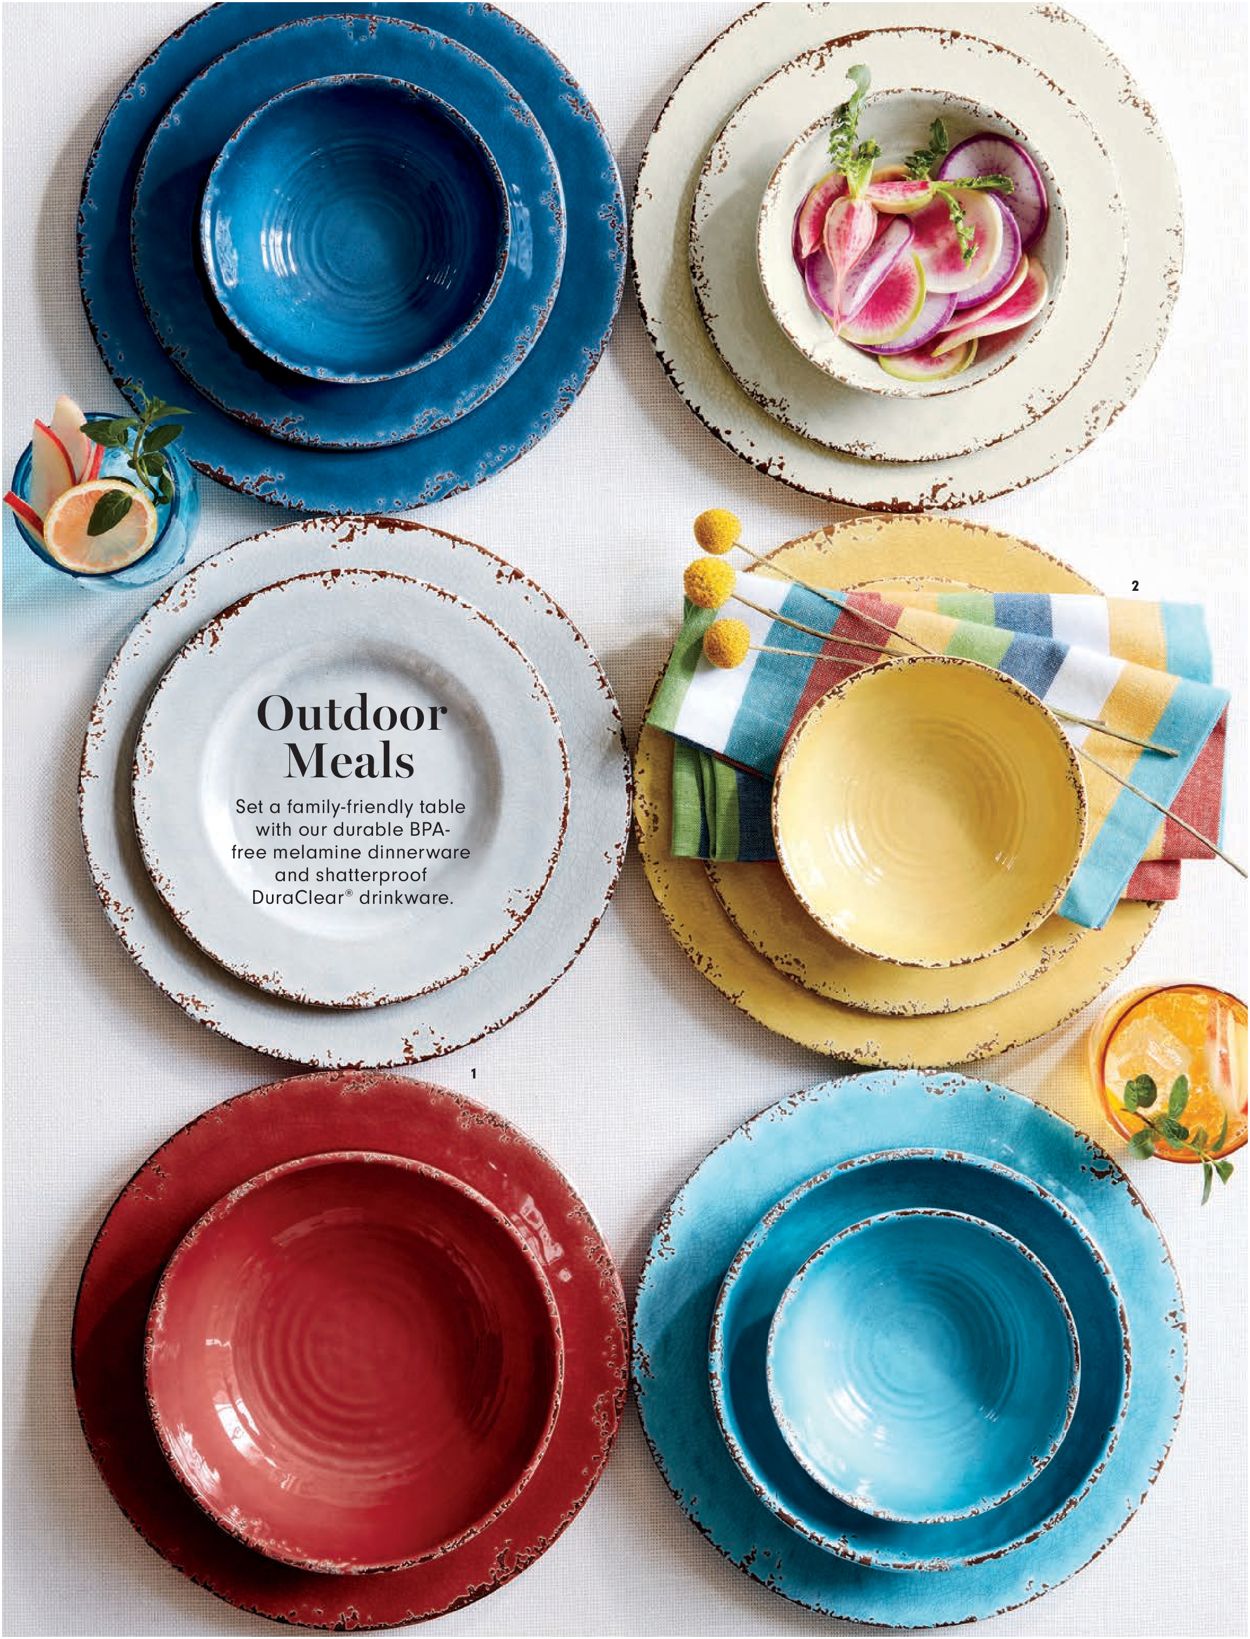 Williams-Sonoma Ad from 06/01/2020